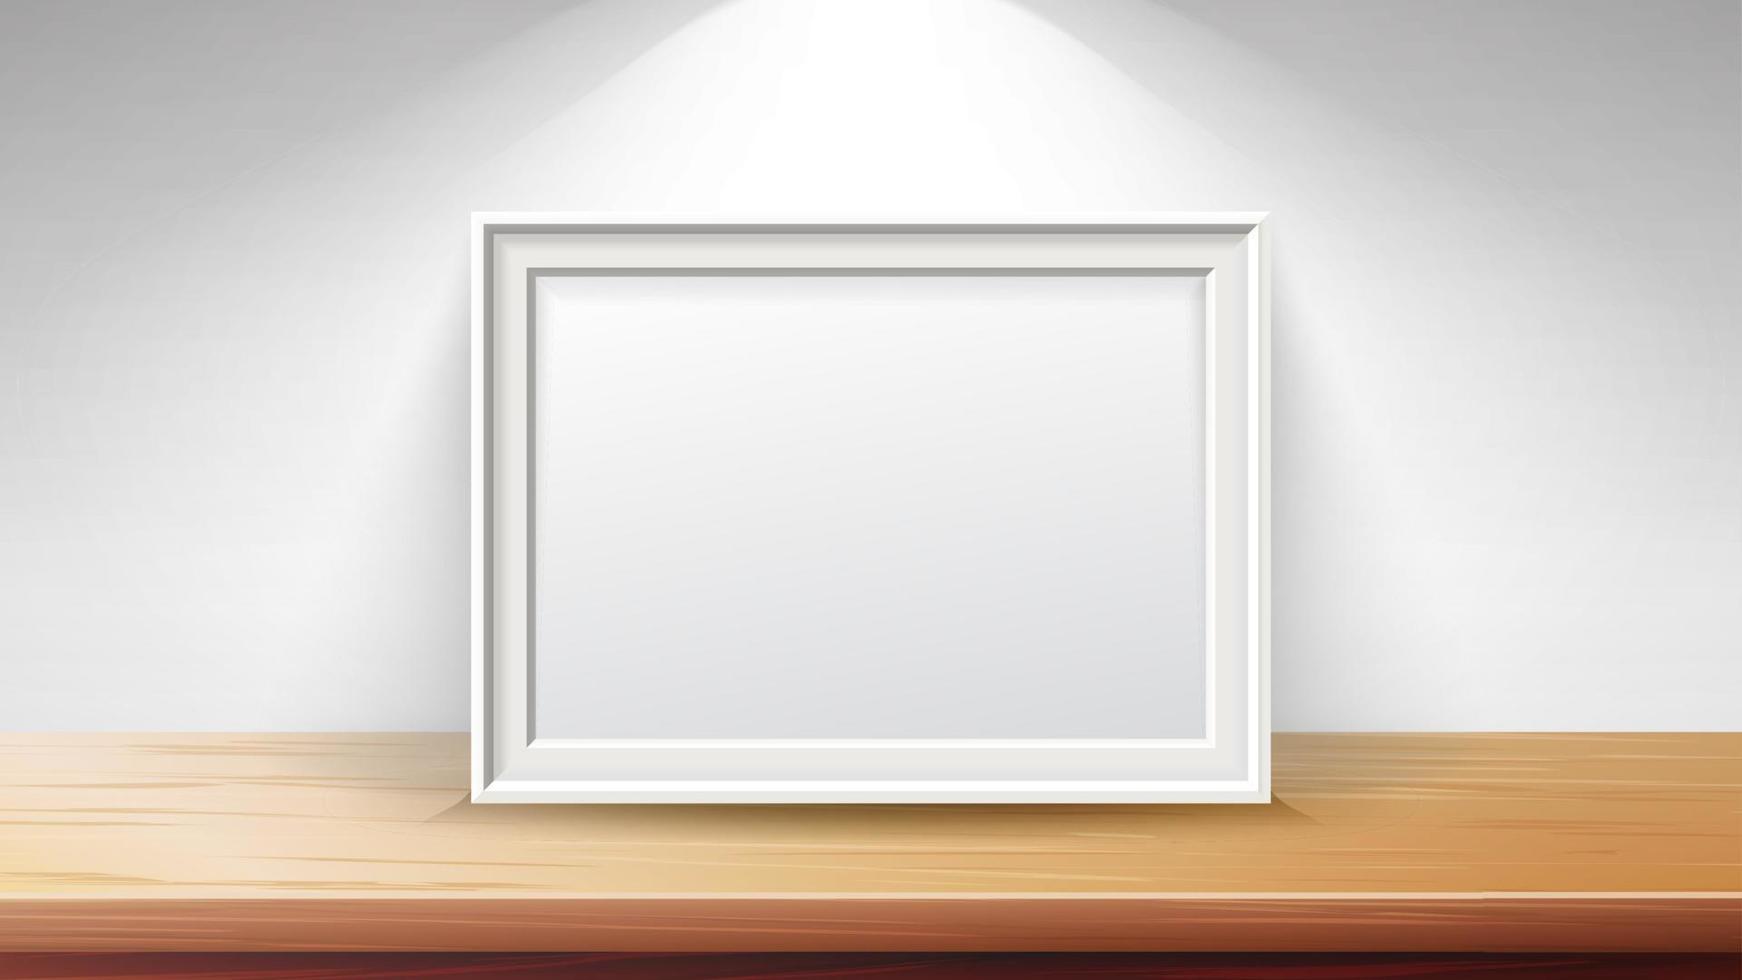 Rectangular Frame Background Concept Vector. Good For Display Your Projects. Blank For Exhibit. High Quality Design Element Illustration. vector